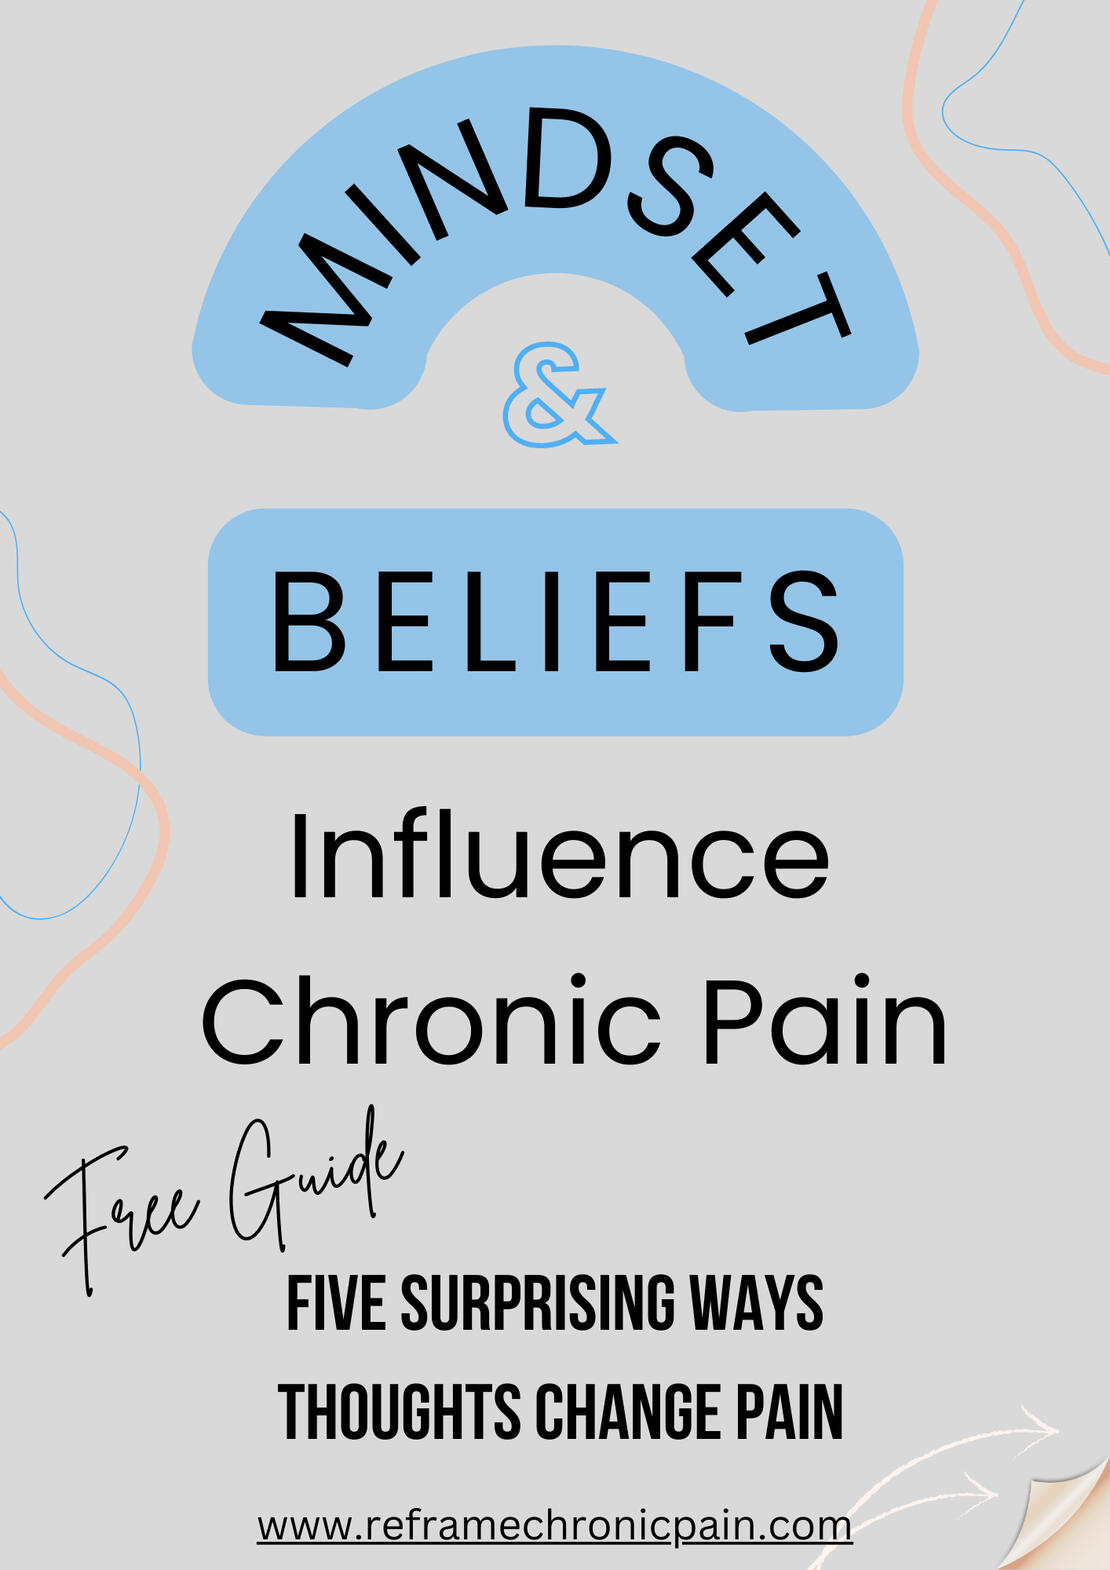 mindset and beliefs influence chronic pain